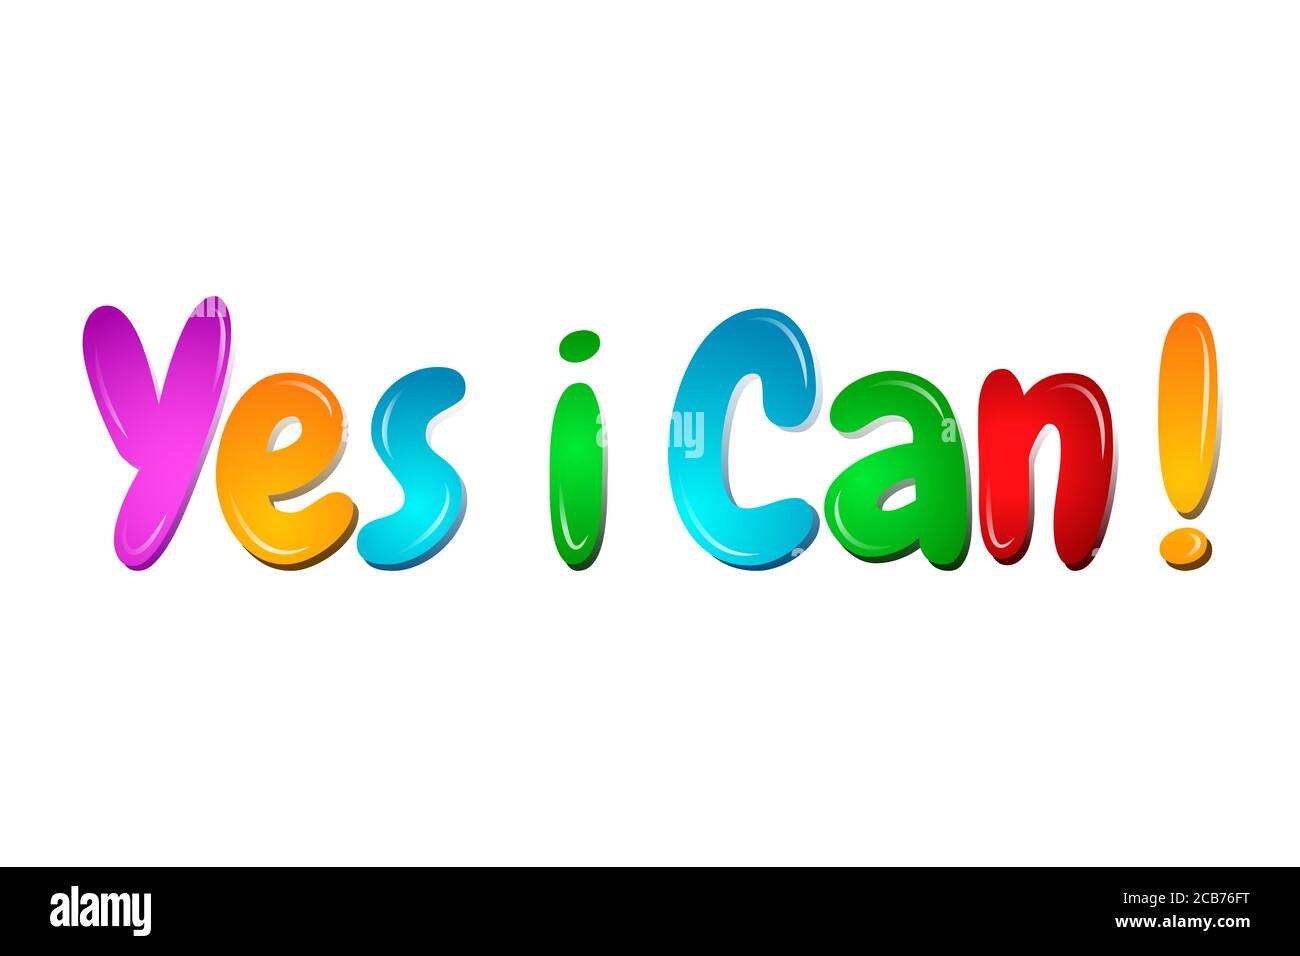 Yes i can